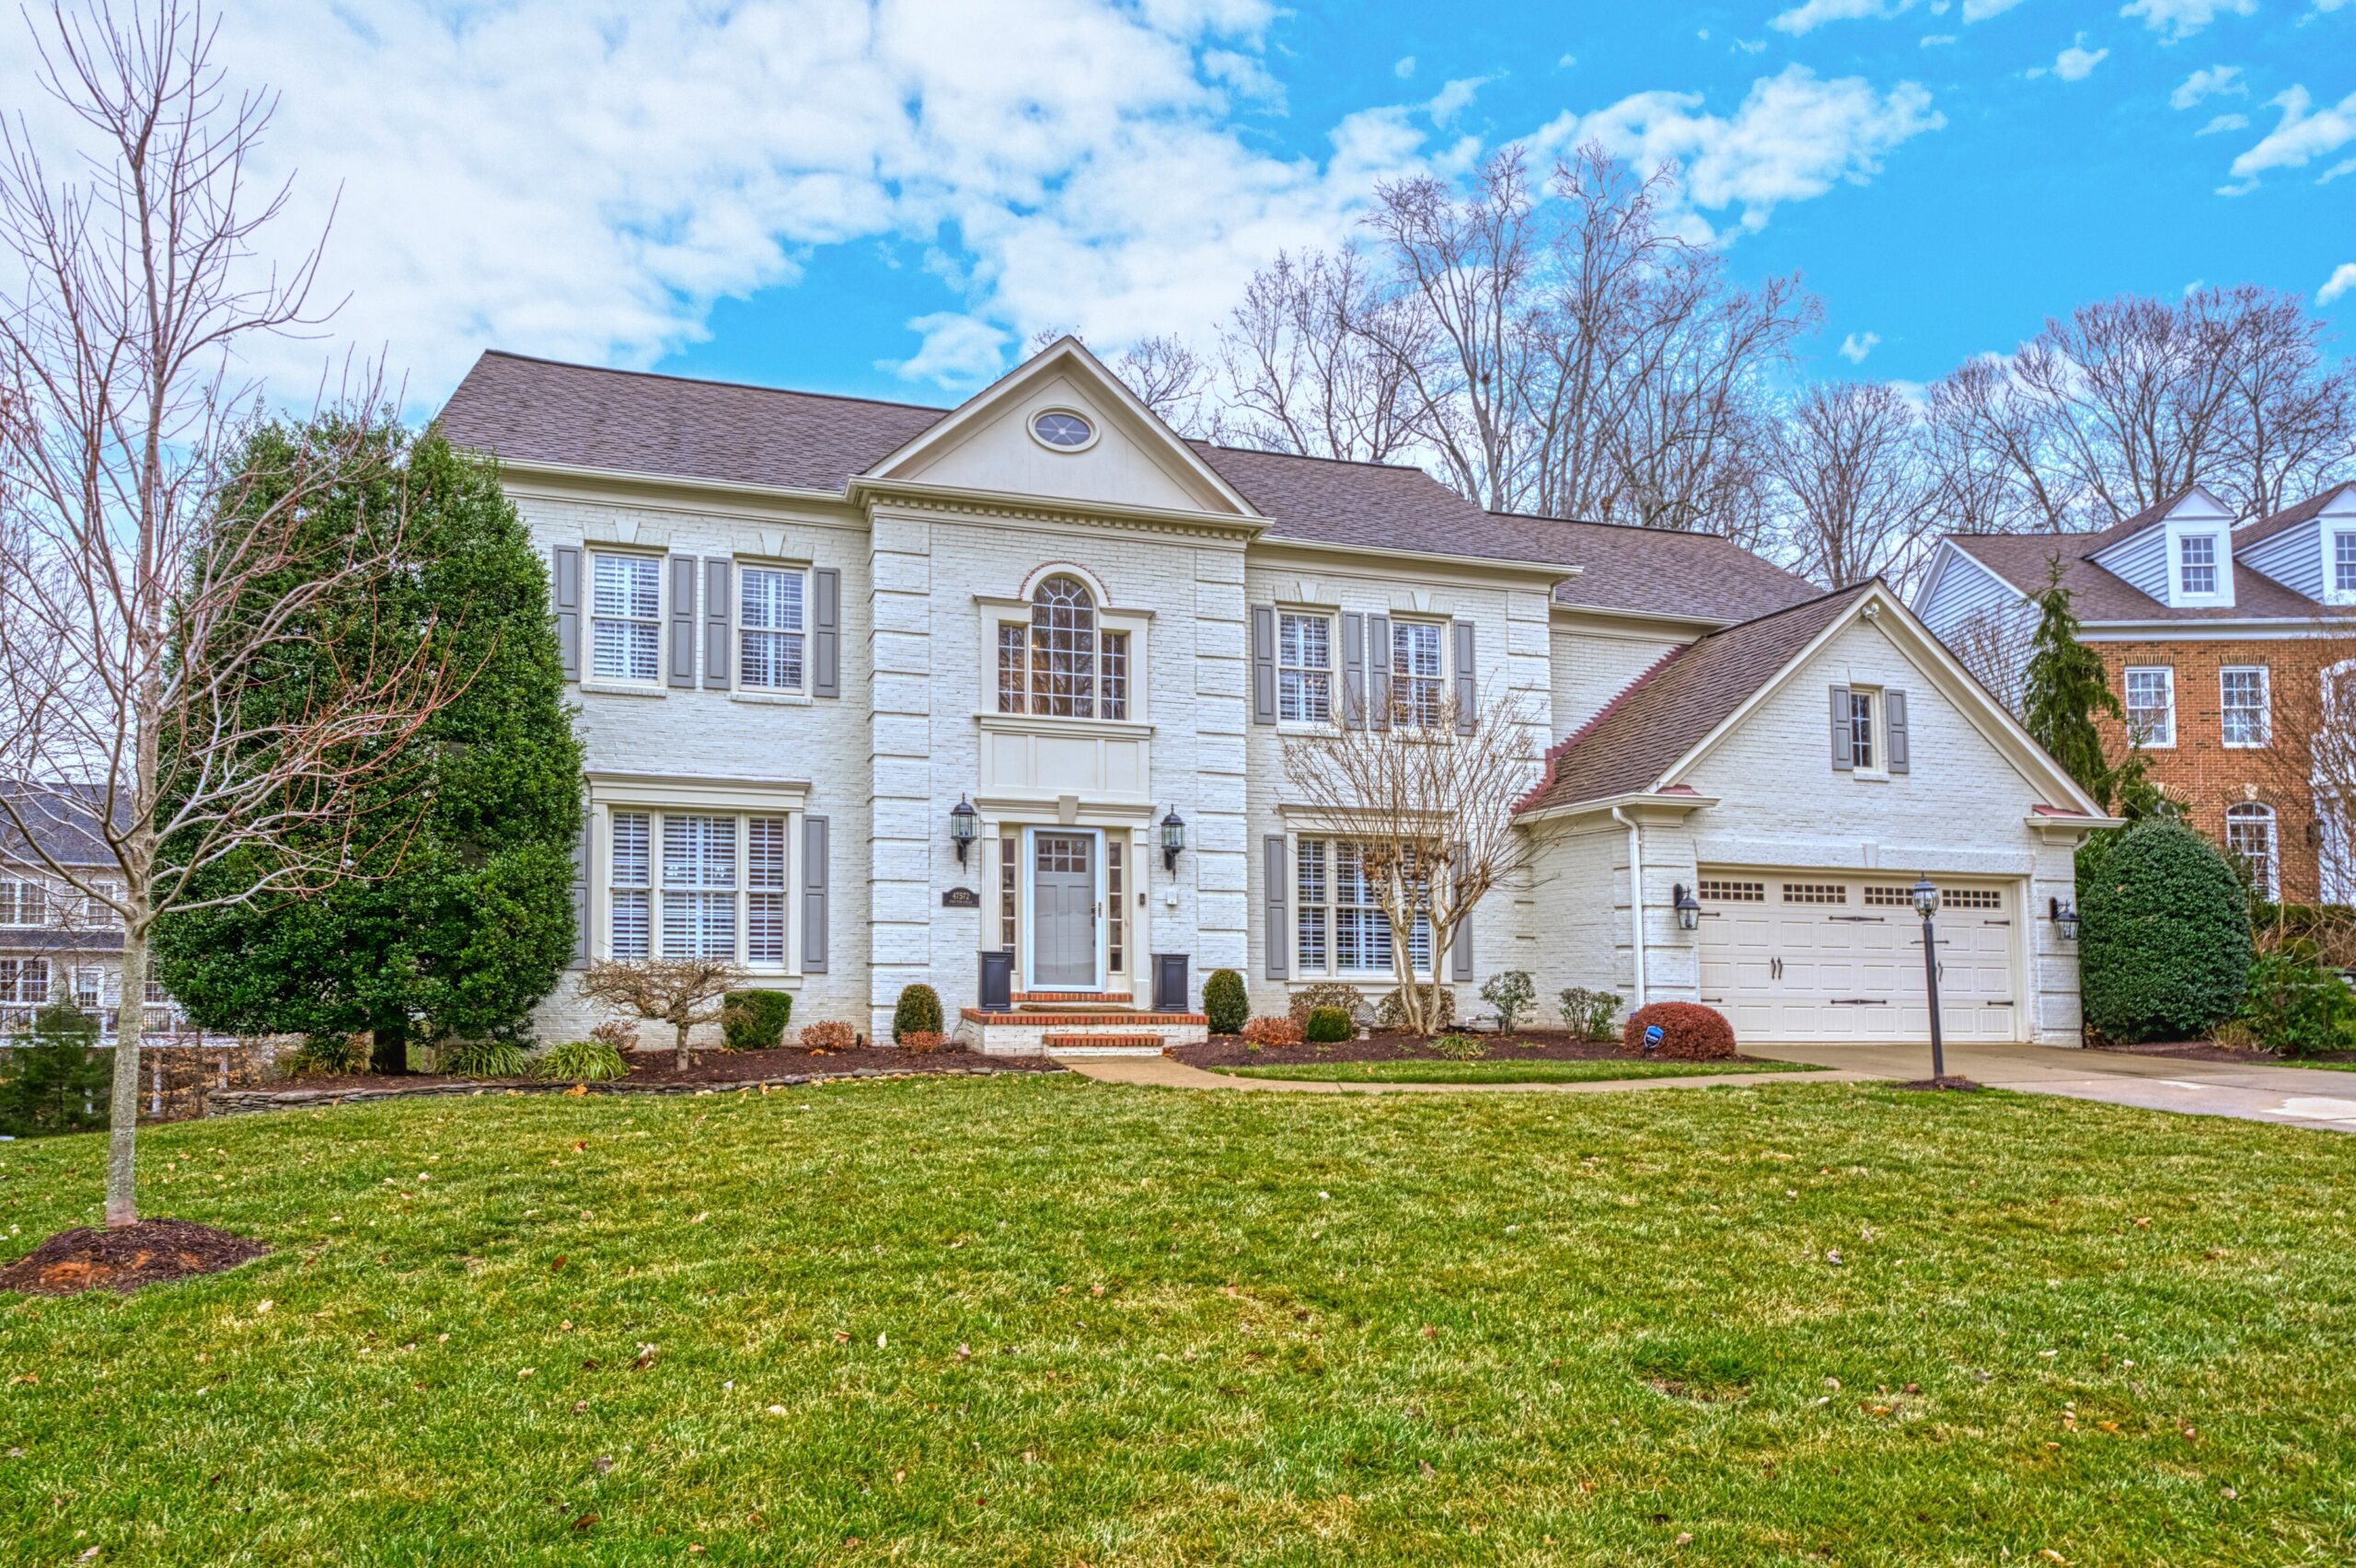 Exterior professional photo of 47572 Compton Circle, Sterling, VA - showing the front which is white stone with a 2 car garage and brick path